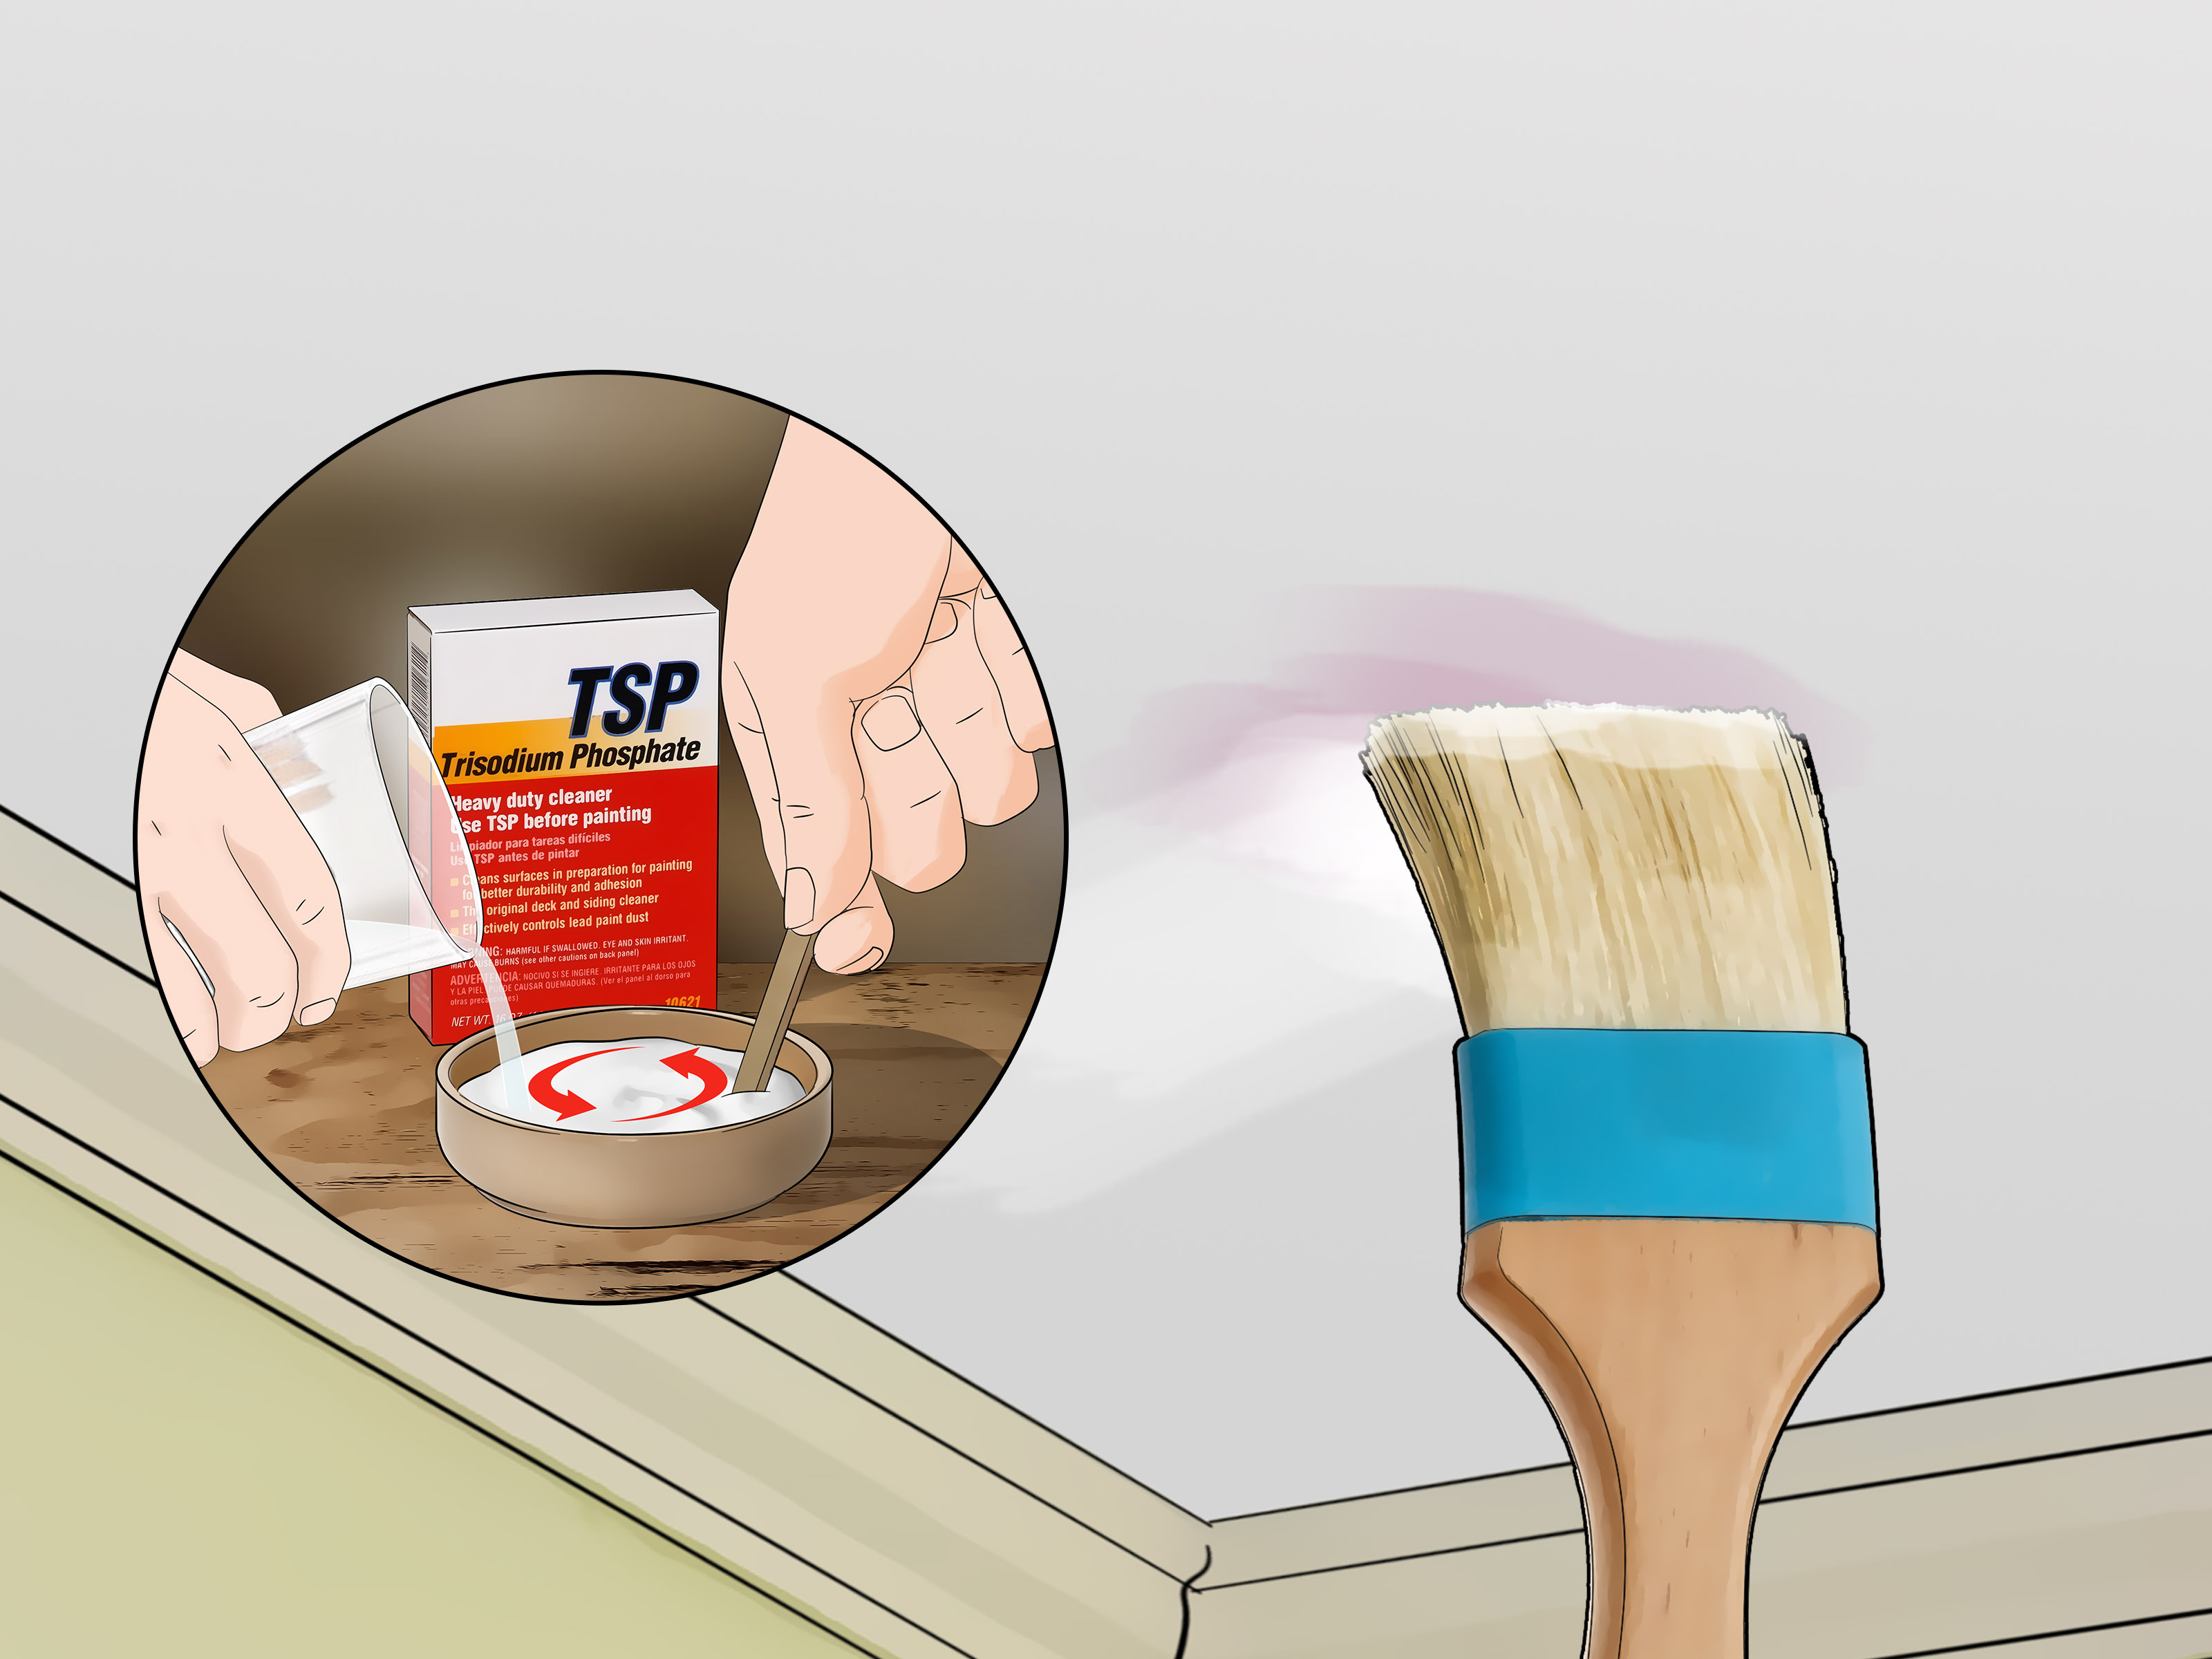 Image Titled Clean Ceilings Step - Clean Walls With Tsp Before Painting - HD Wallpaper 